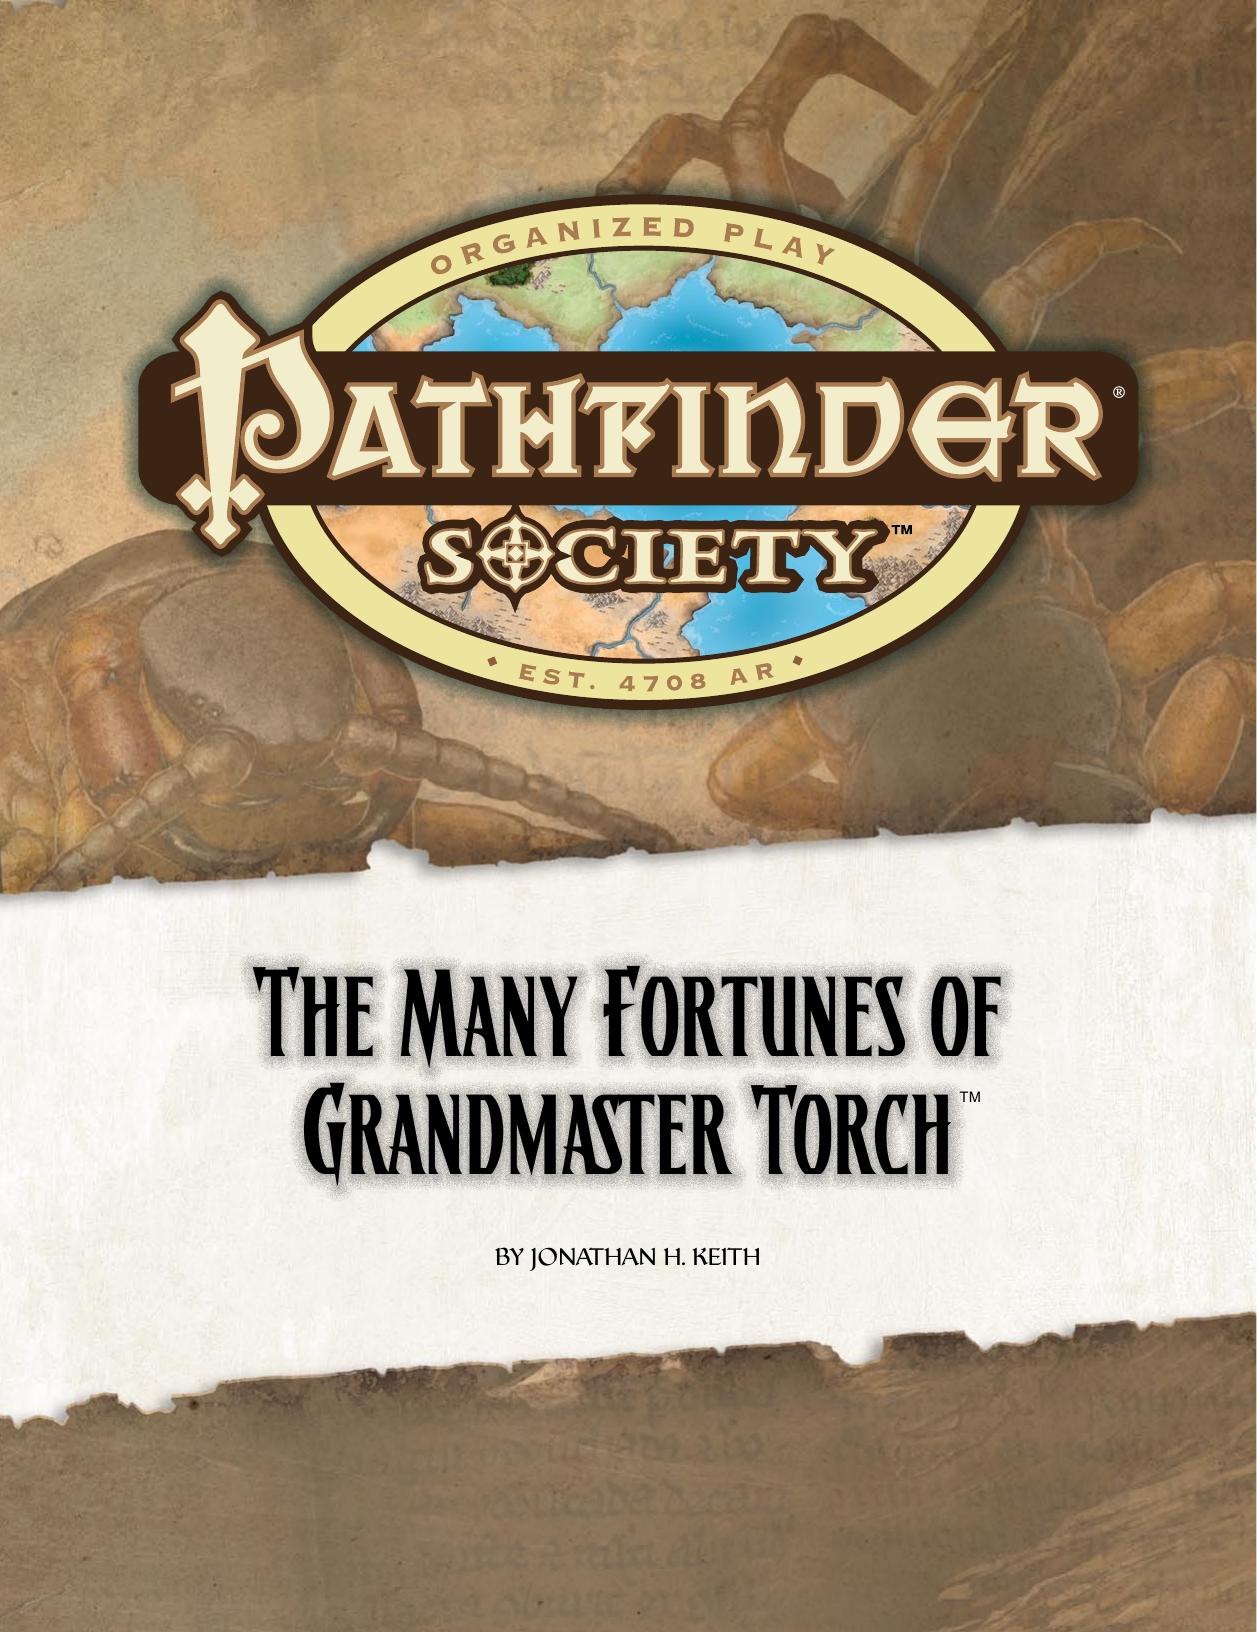 The Many Fortunes of Grandmaster Torch